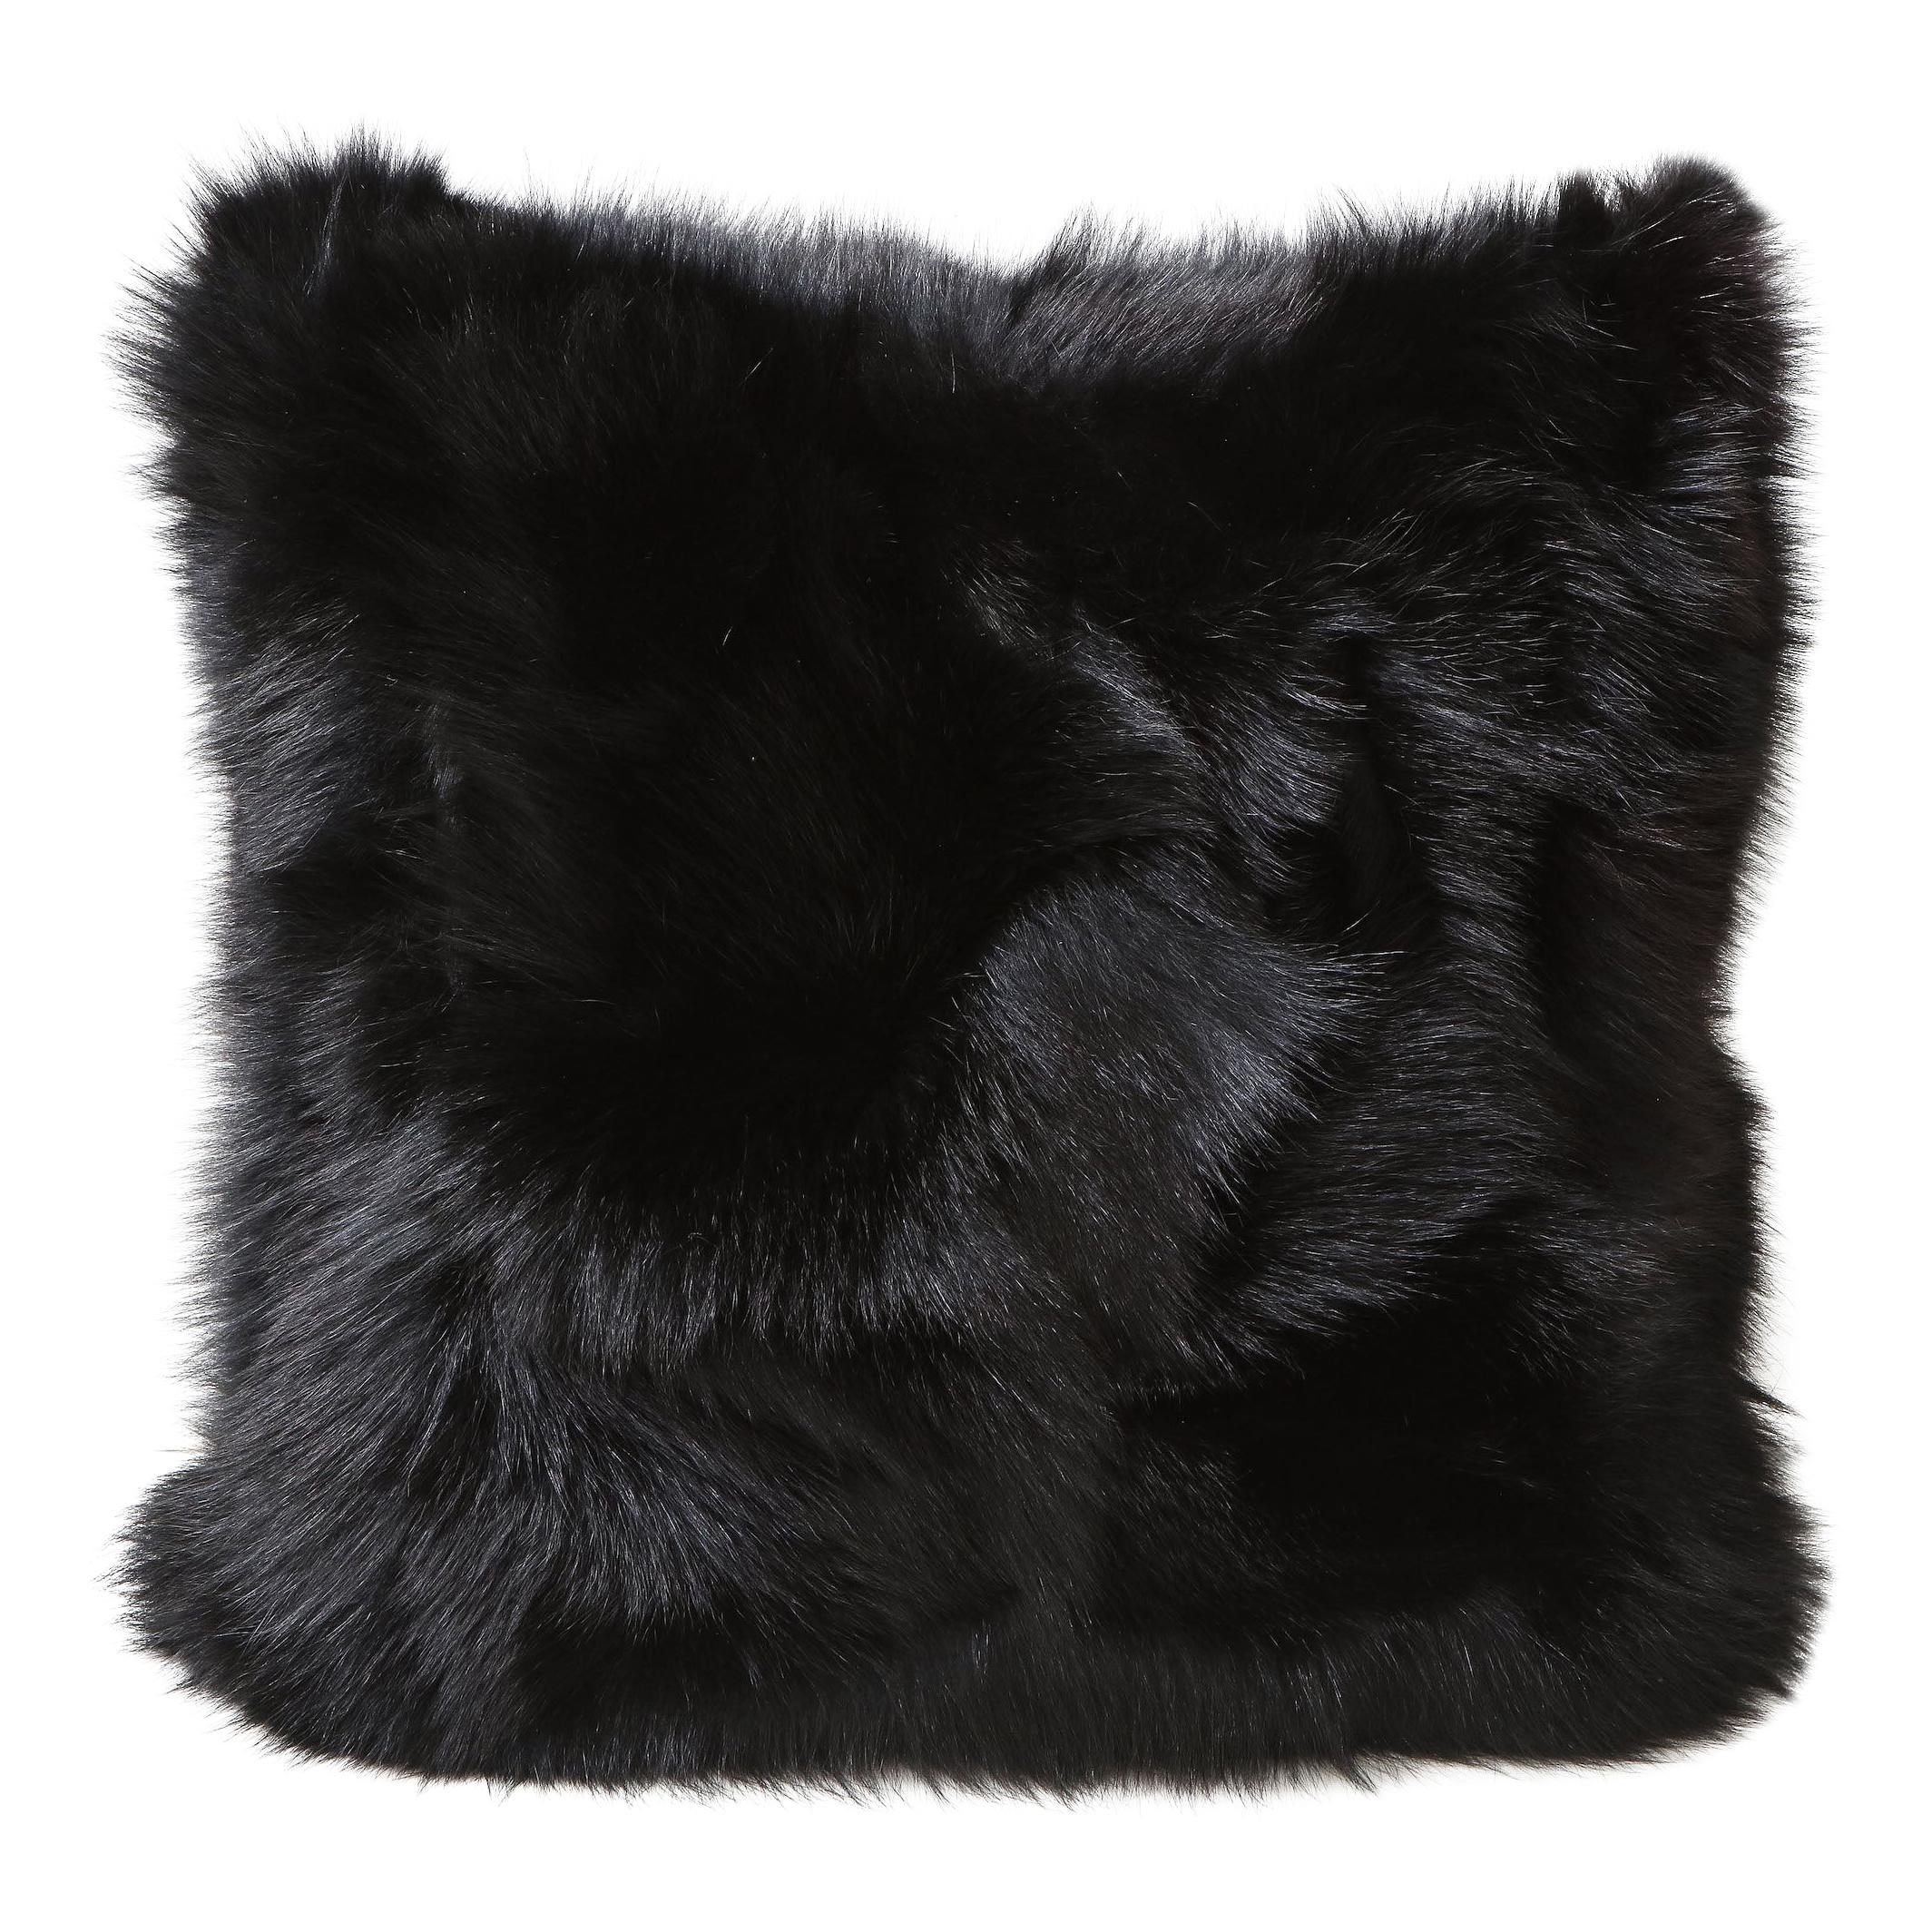 Double Sided Toscana Shearling Pillow in Black Color